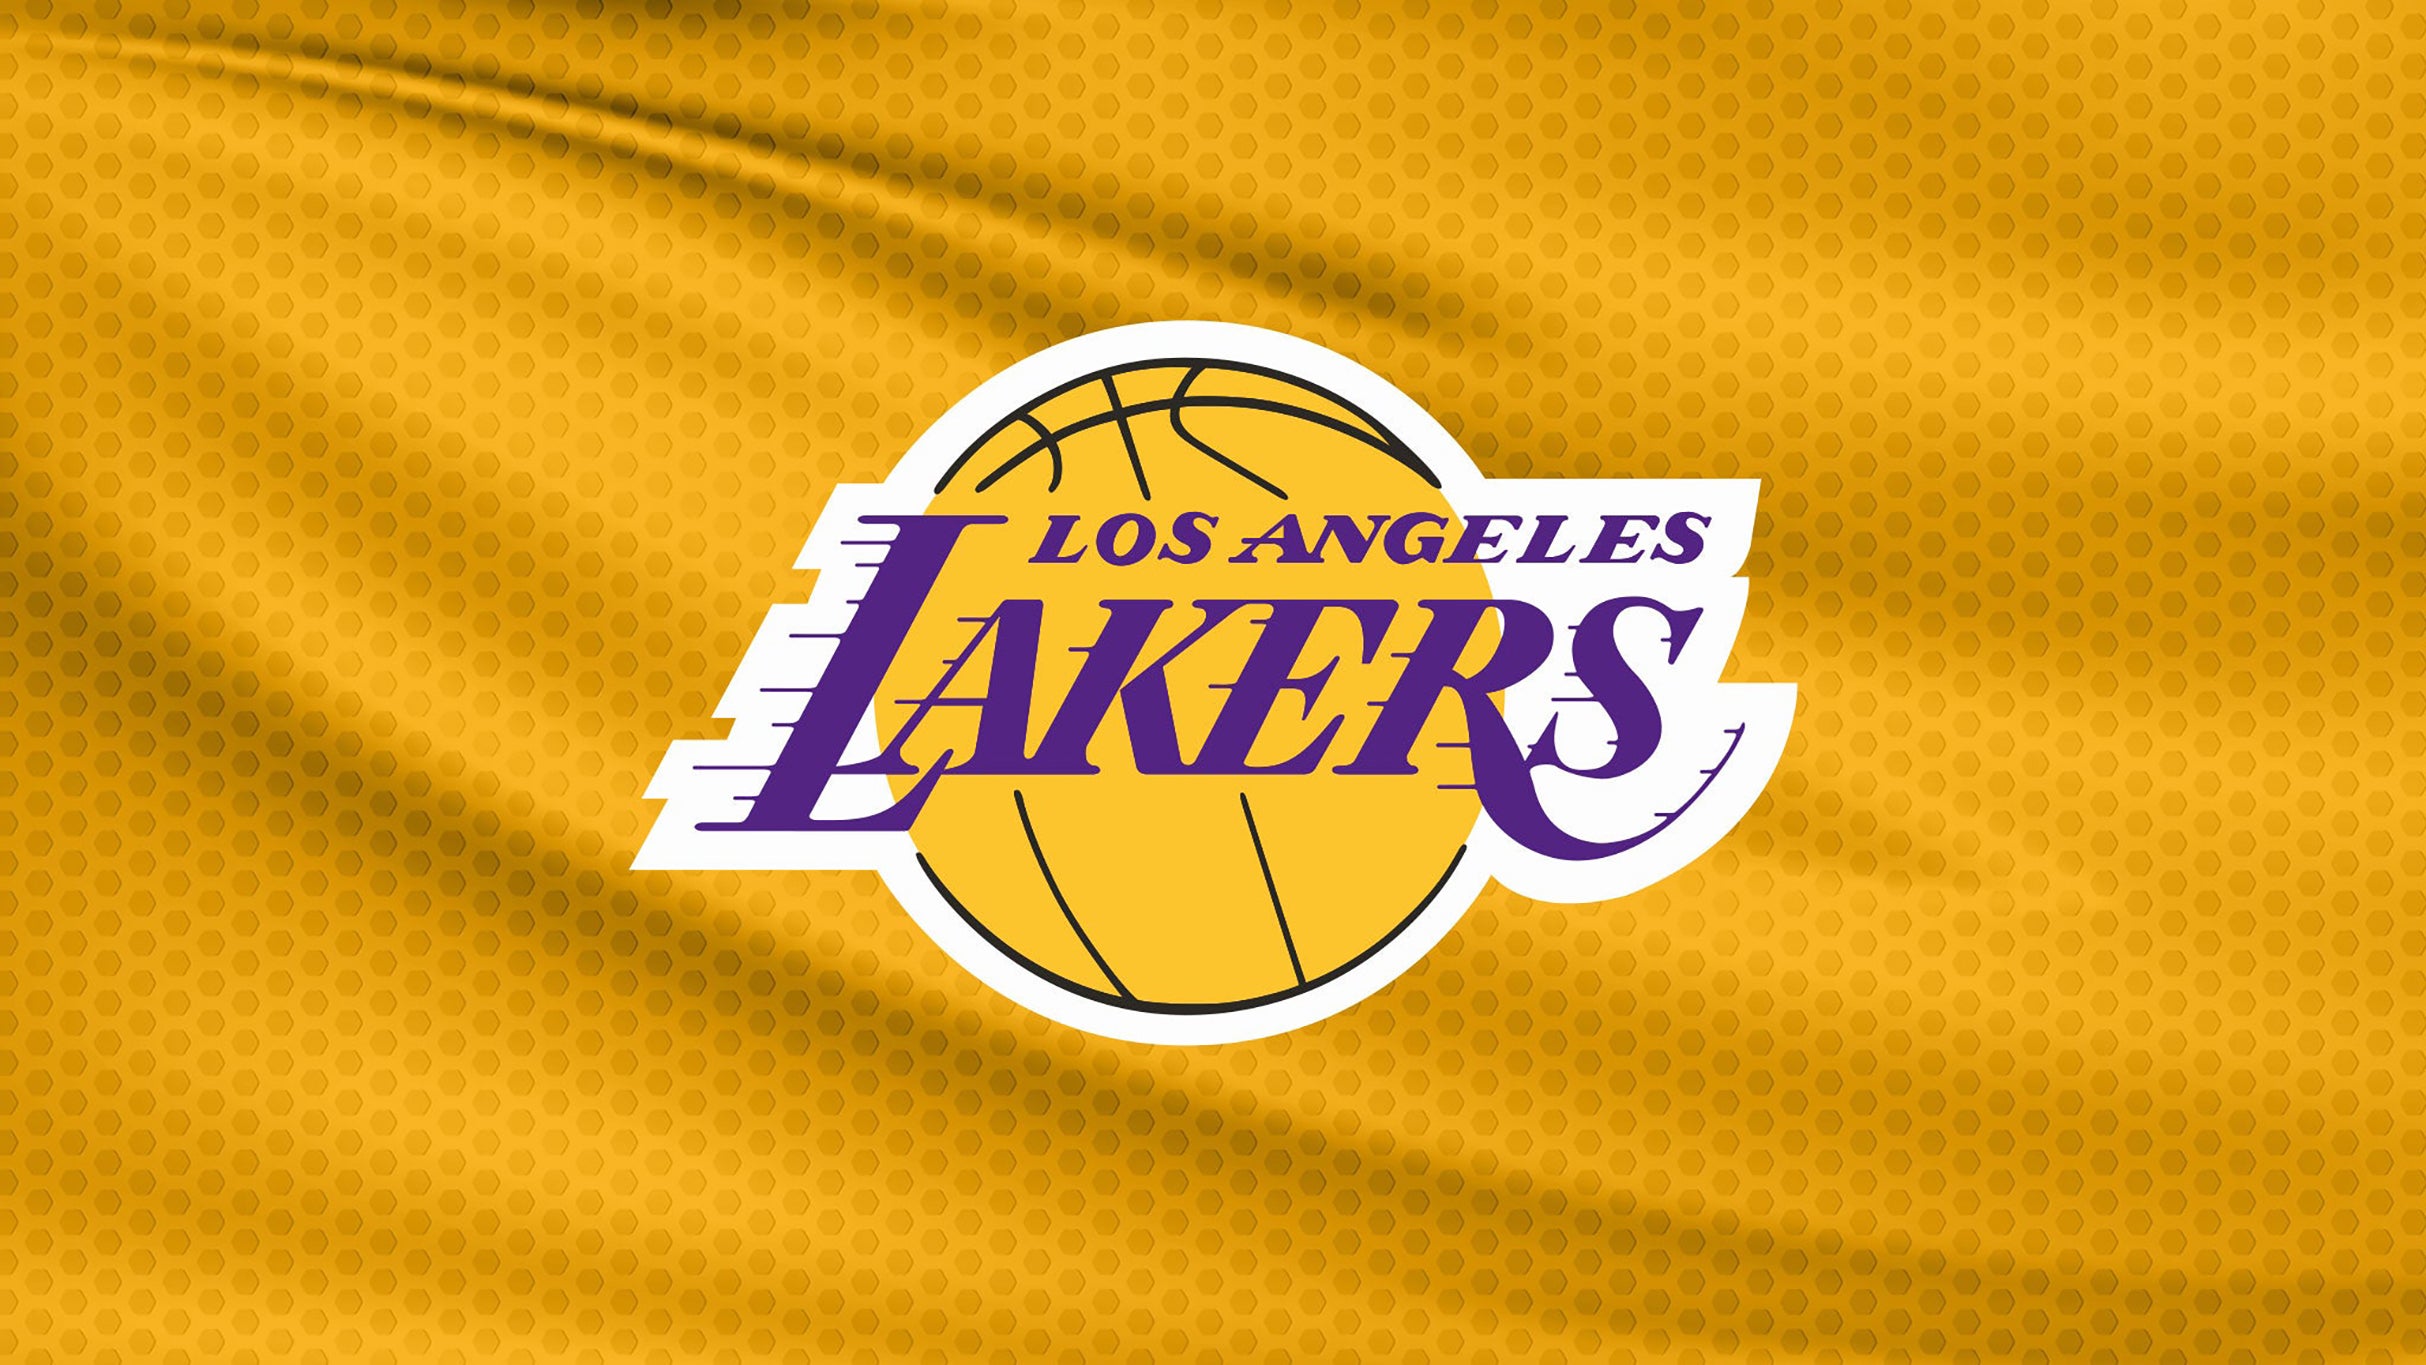 Los Angeles Lakers vs Cleveland Cavaliers